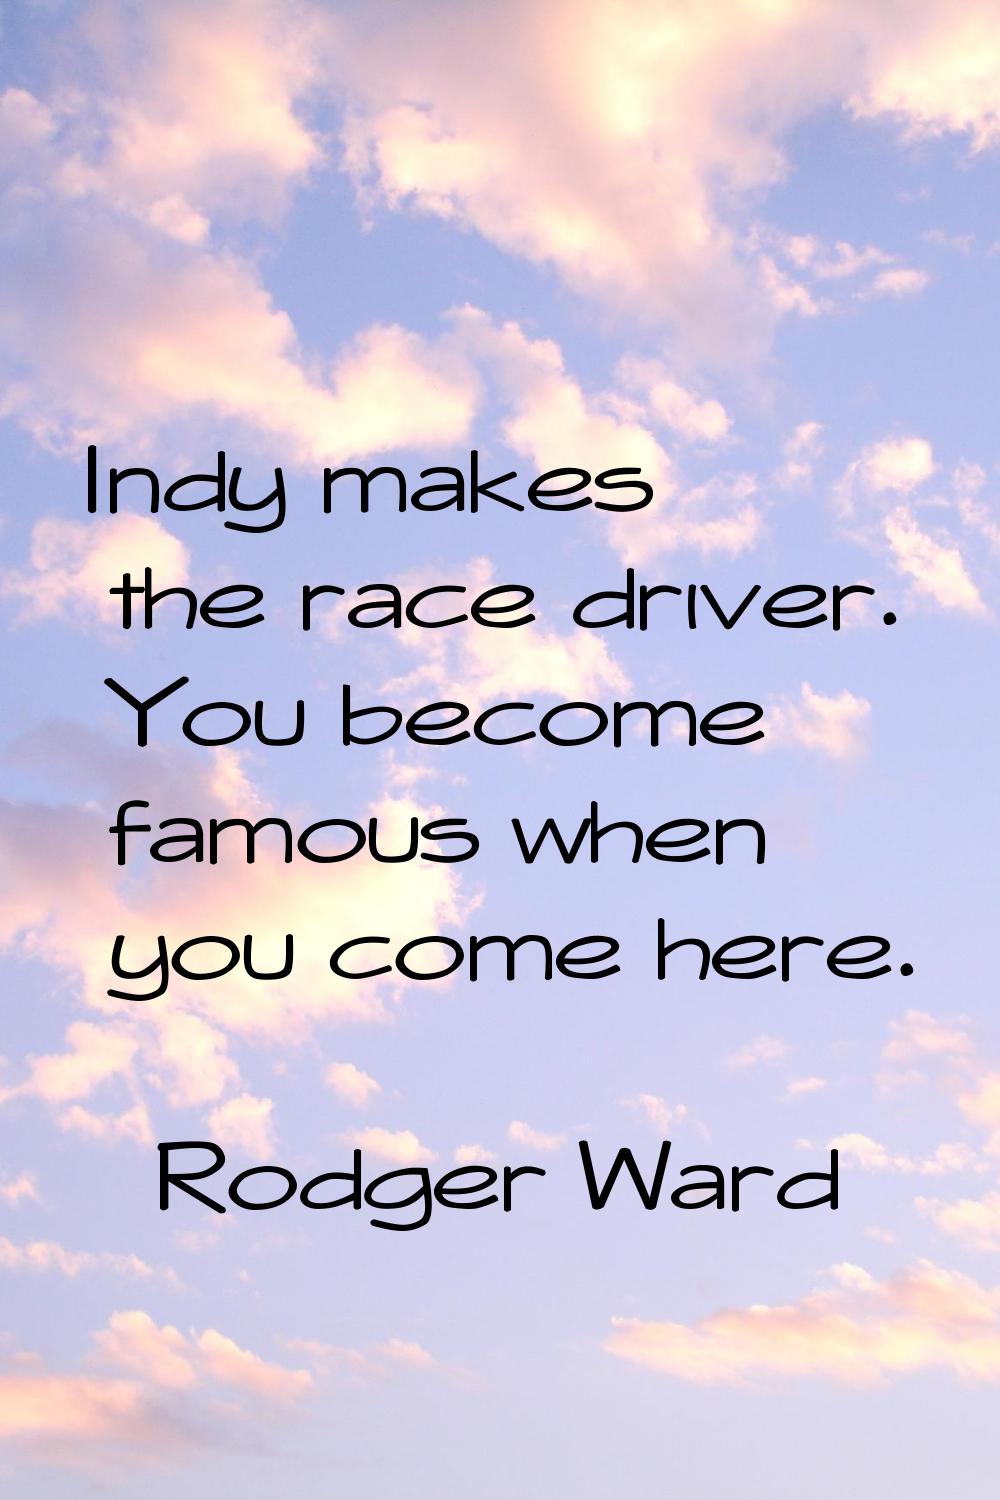 Indy makes the race driver. You become famous when you come here.